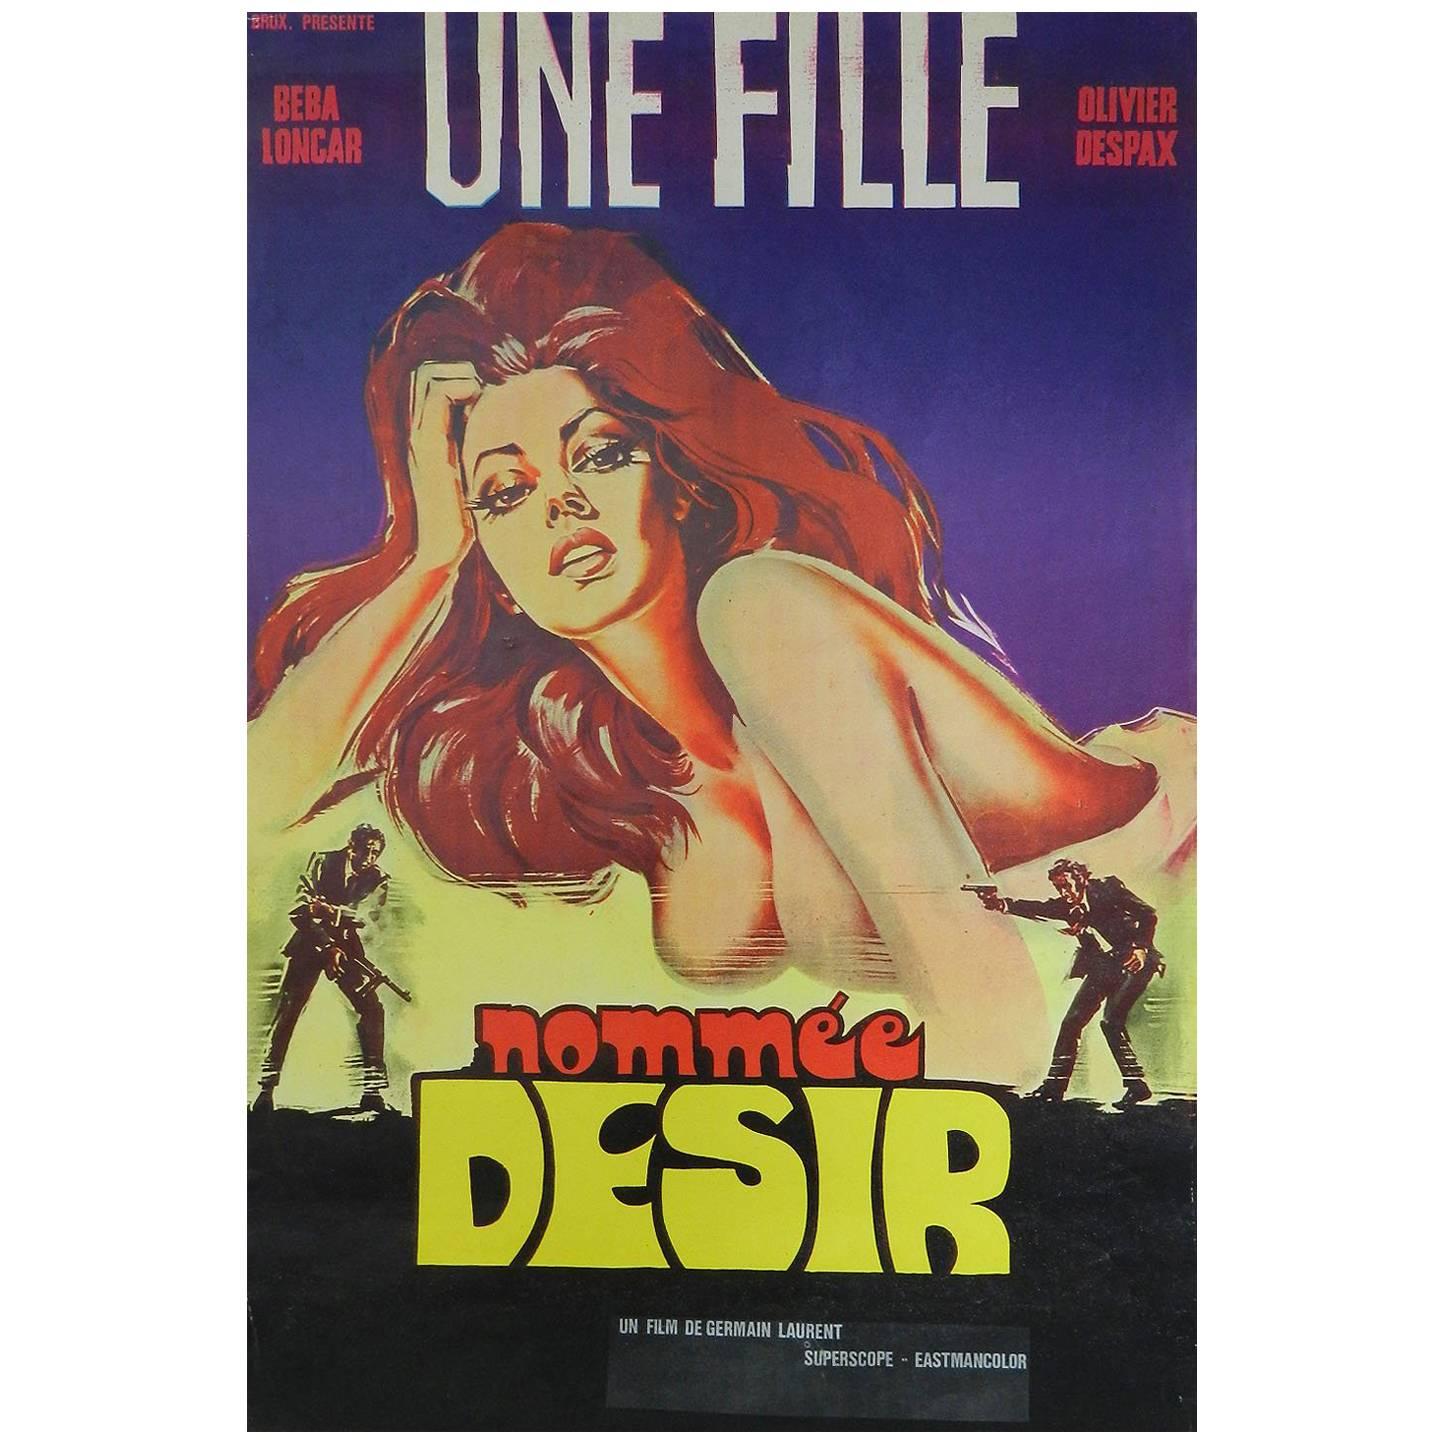 "Une Fille Nommee Desir" Movie Film Poster by C Belinsk 1973 Cover Girl For Sale